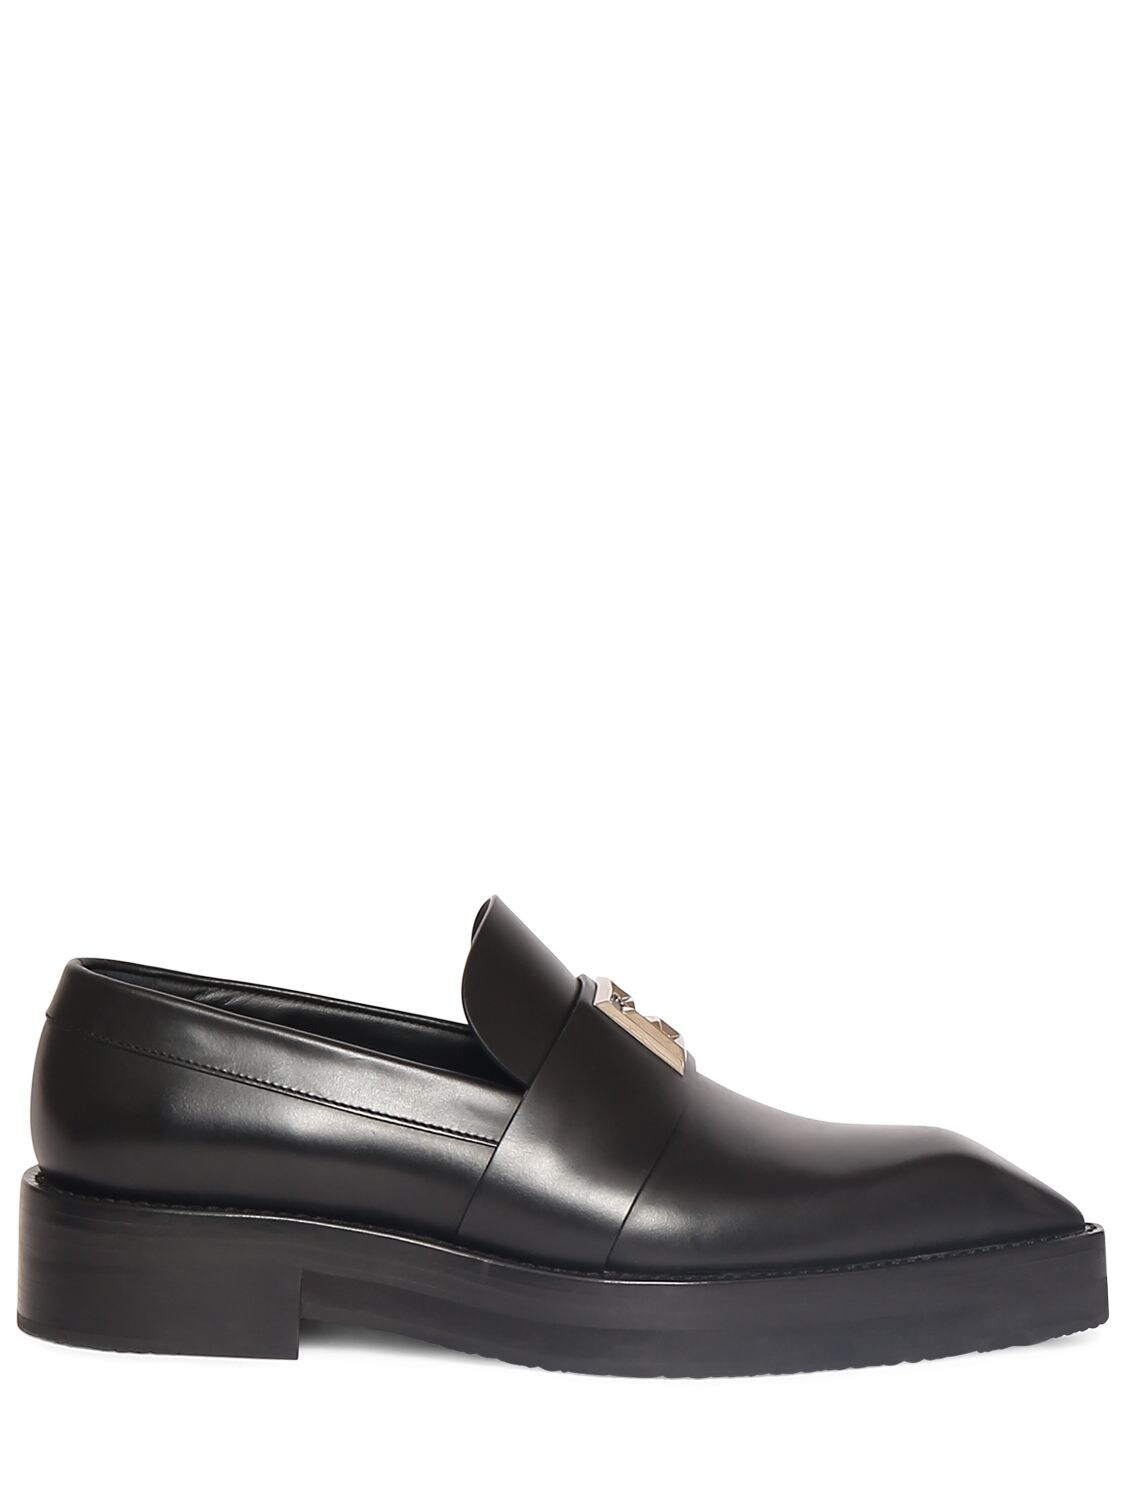 BALMAIN BEN LEATHER LOAFERS